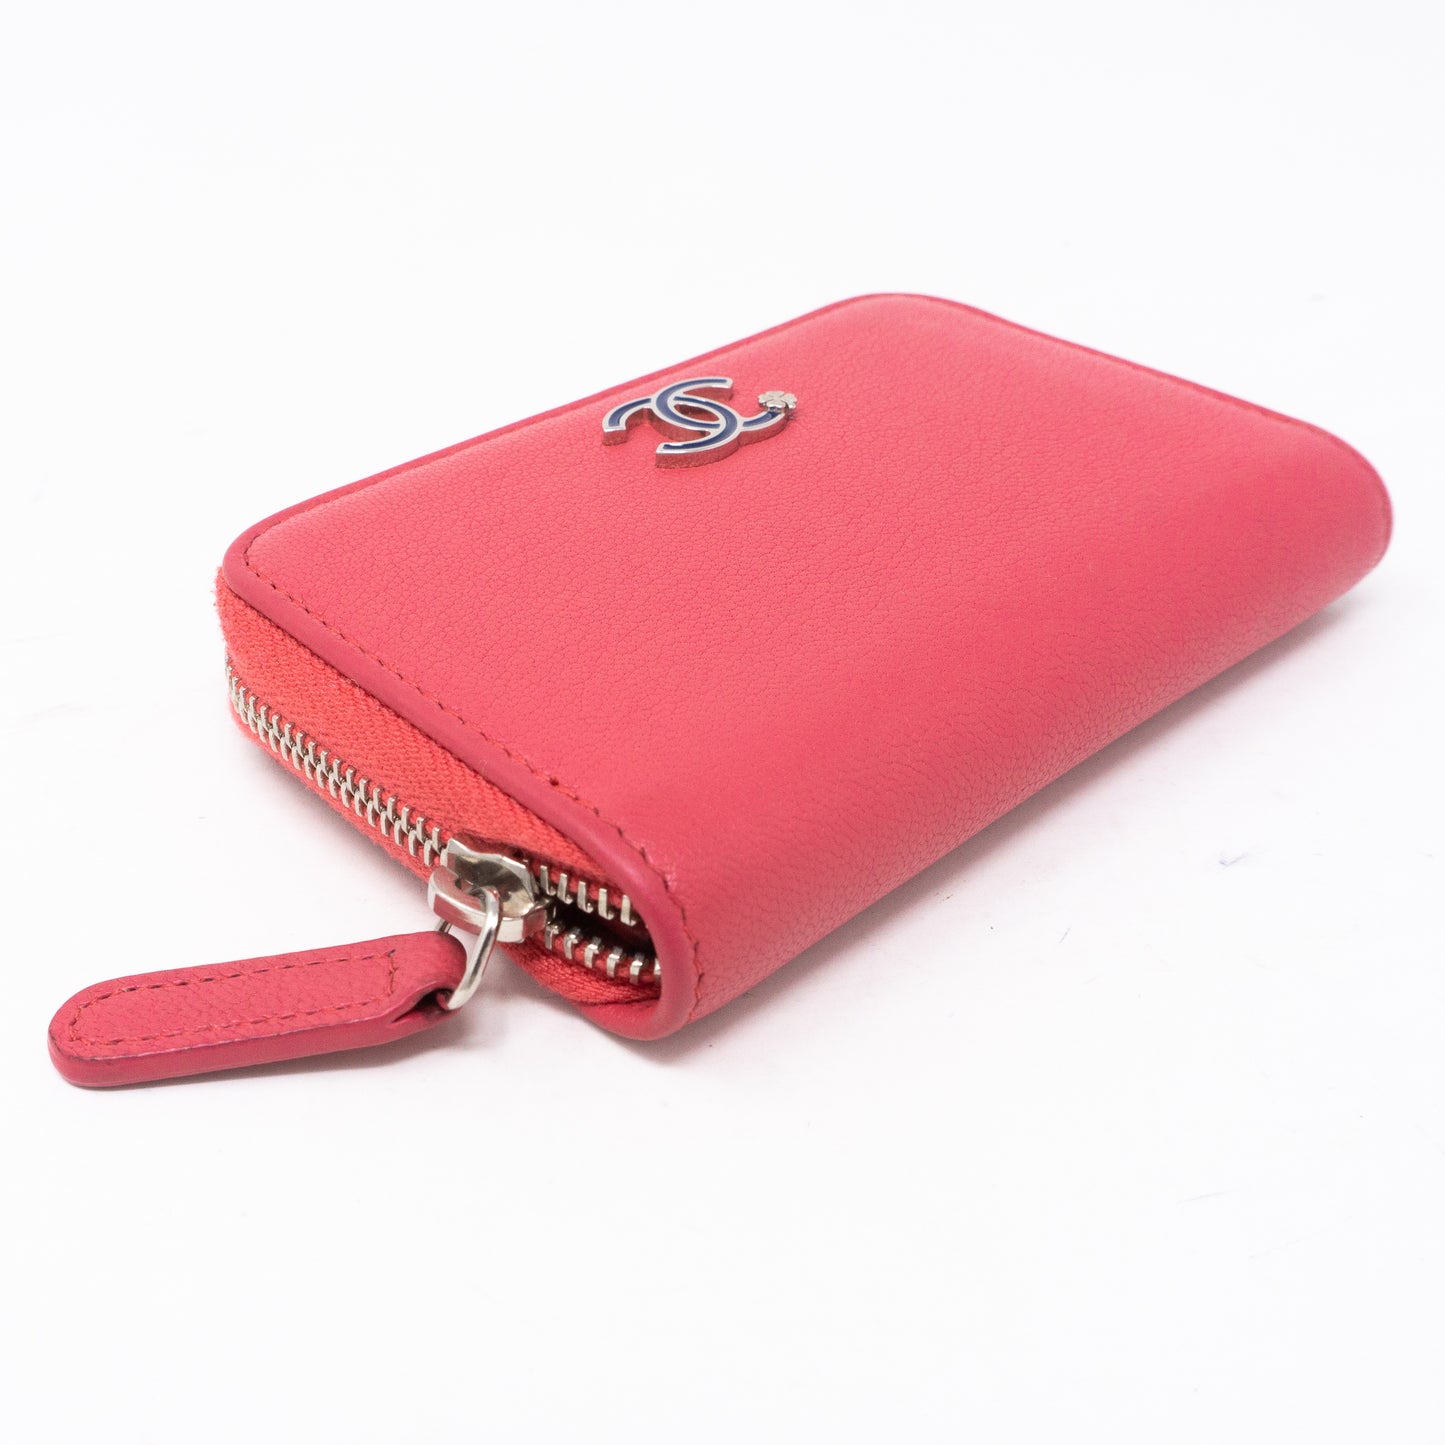 Zipped Coin Purse Lucky Clover Pink Leather